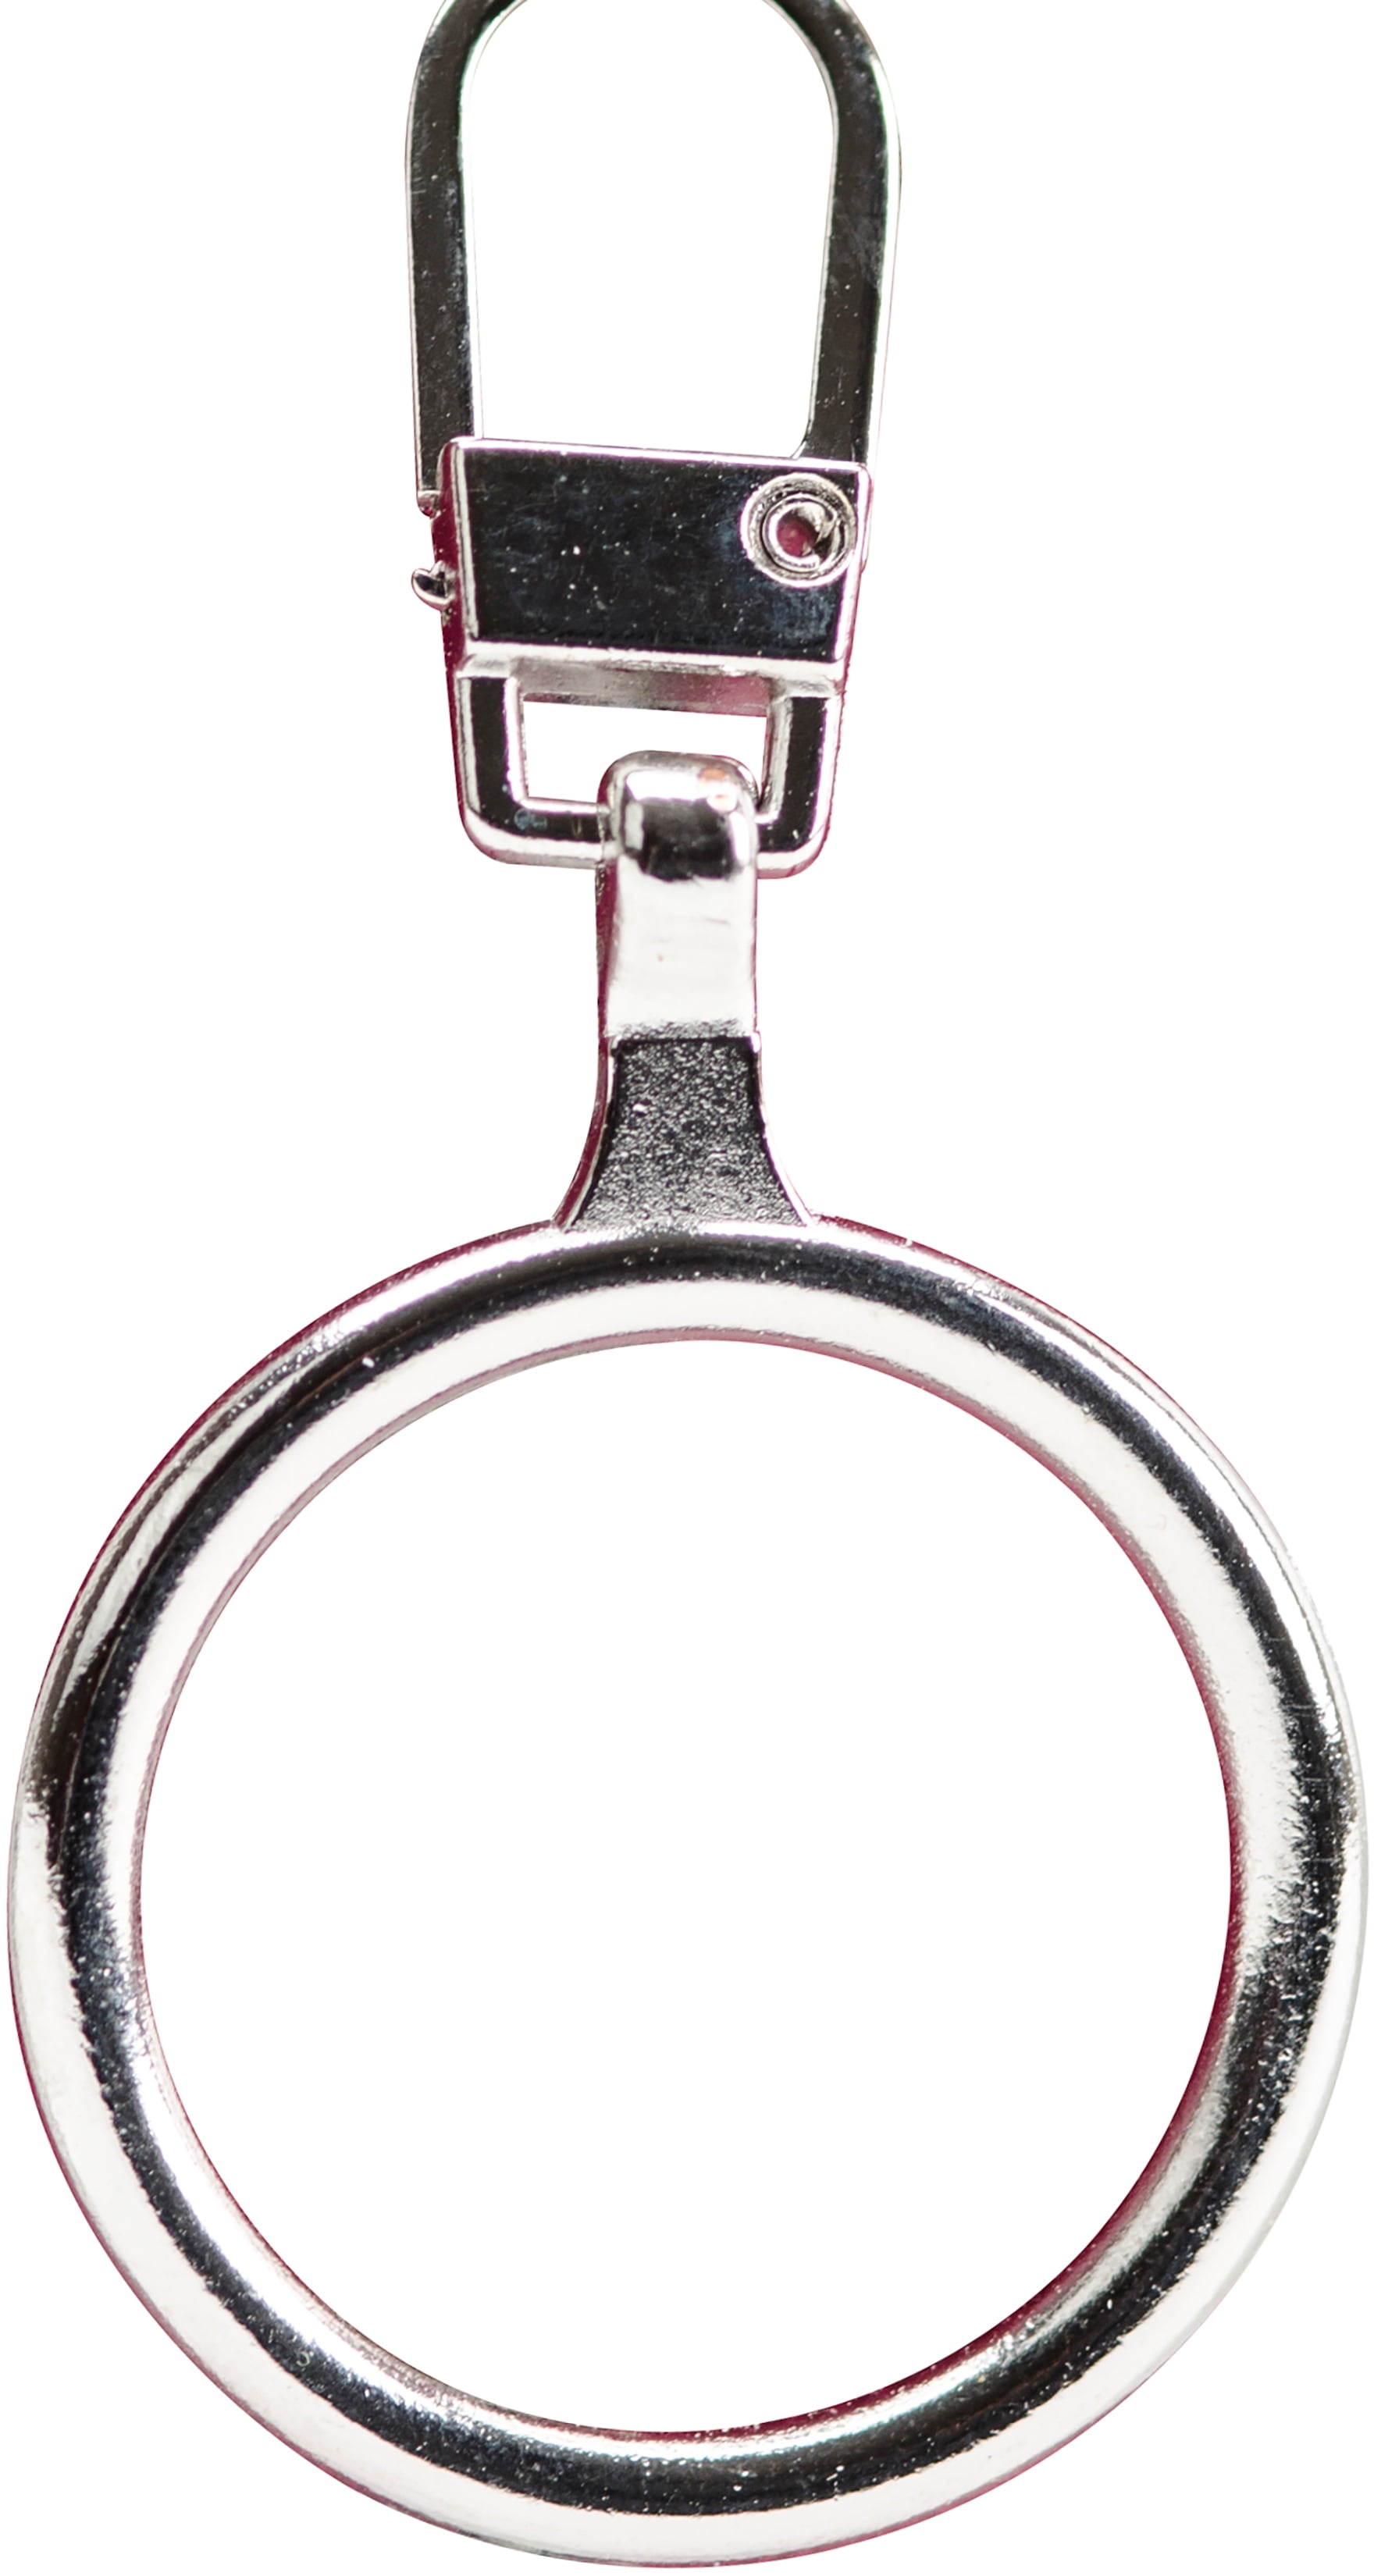 Mood Exclusive Italian Large Silver Round Metal Zipper Pull